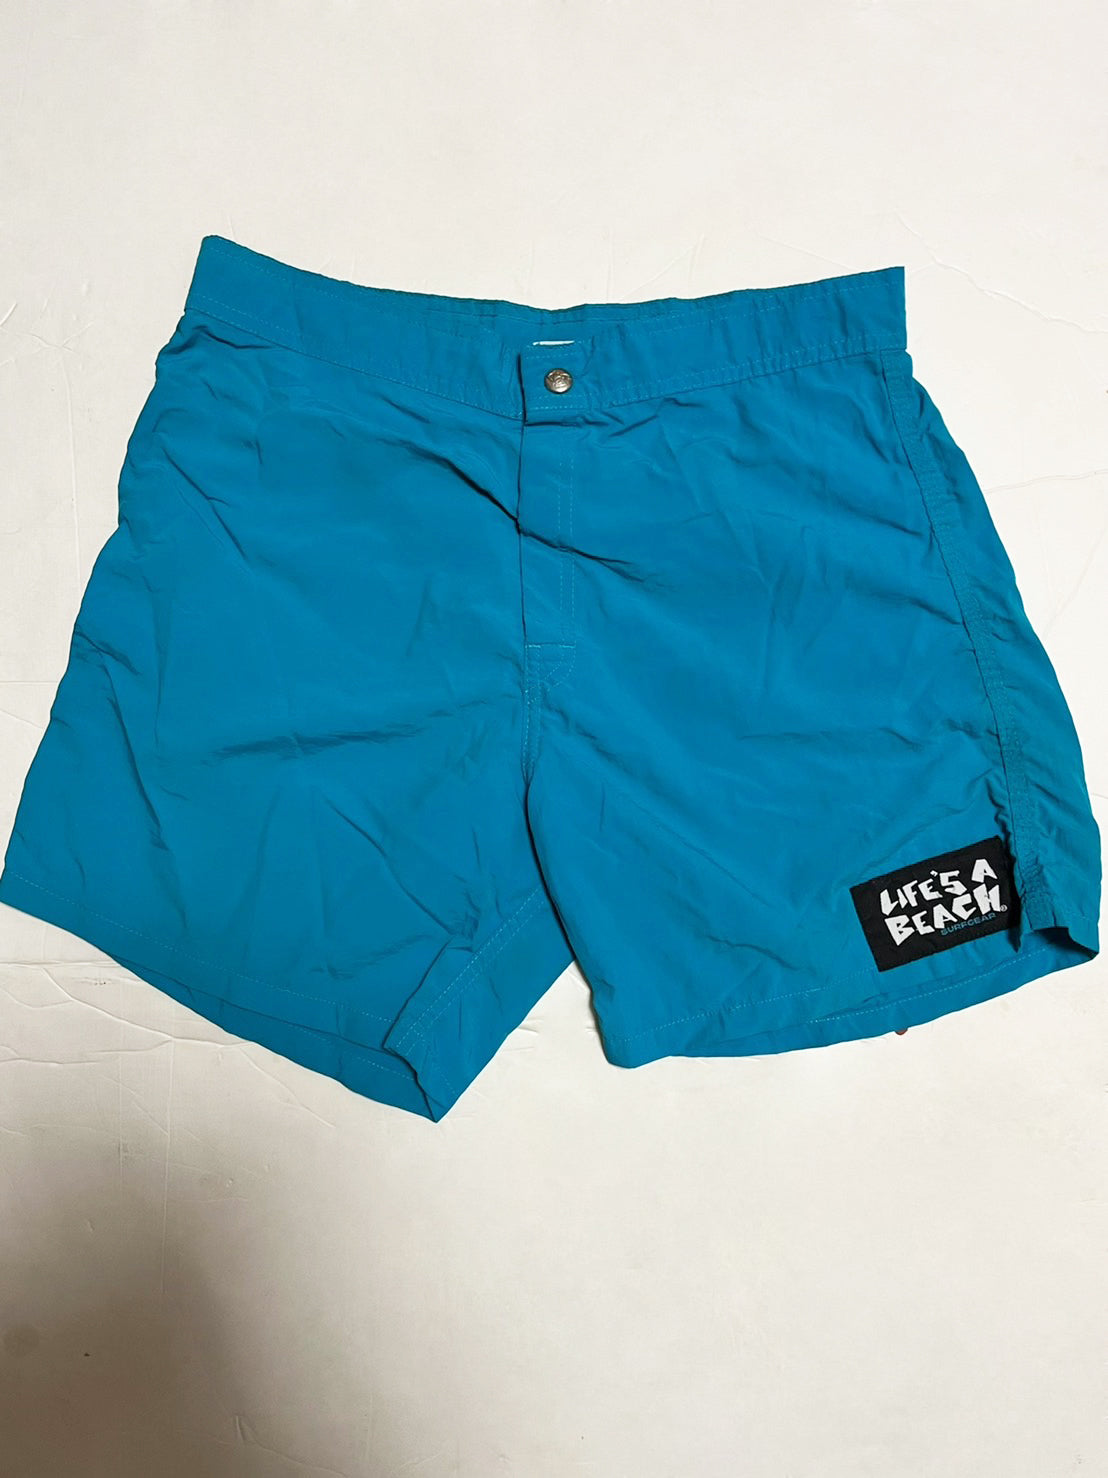 LIFE'S A BEACH SURF GEAR 】80's vintage board short made in USA 